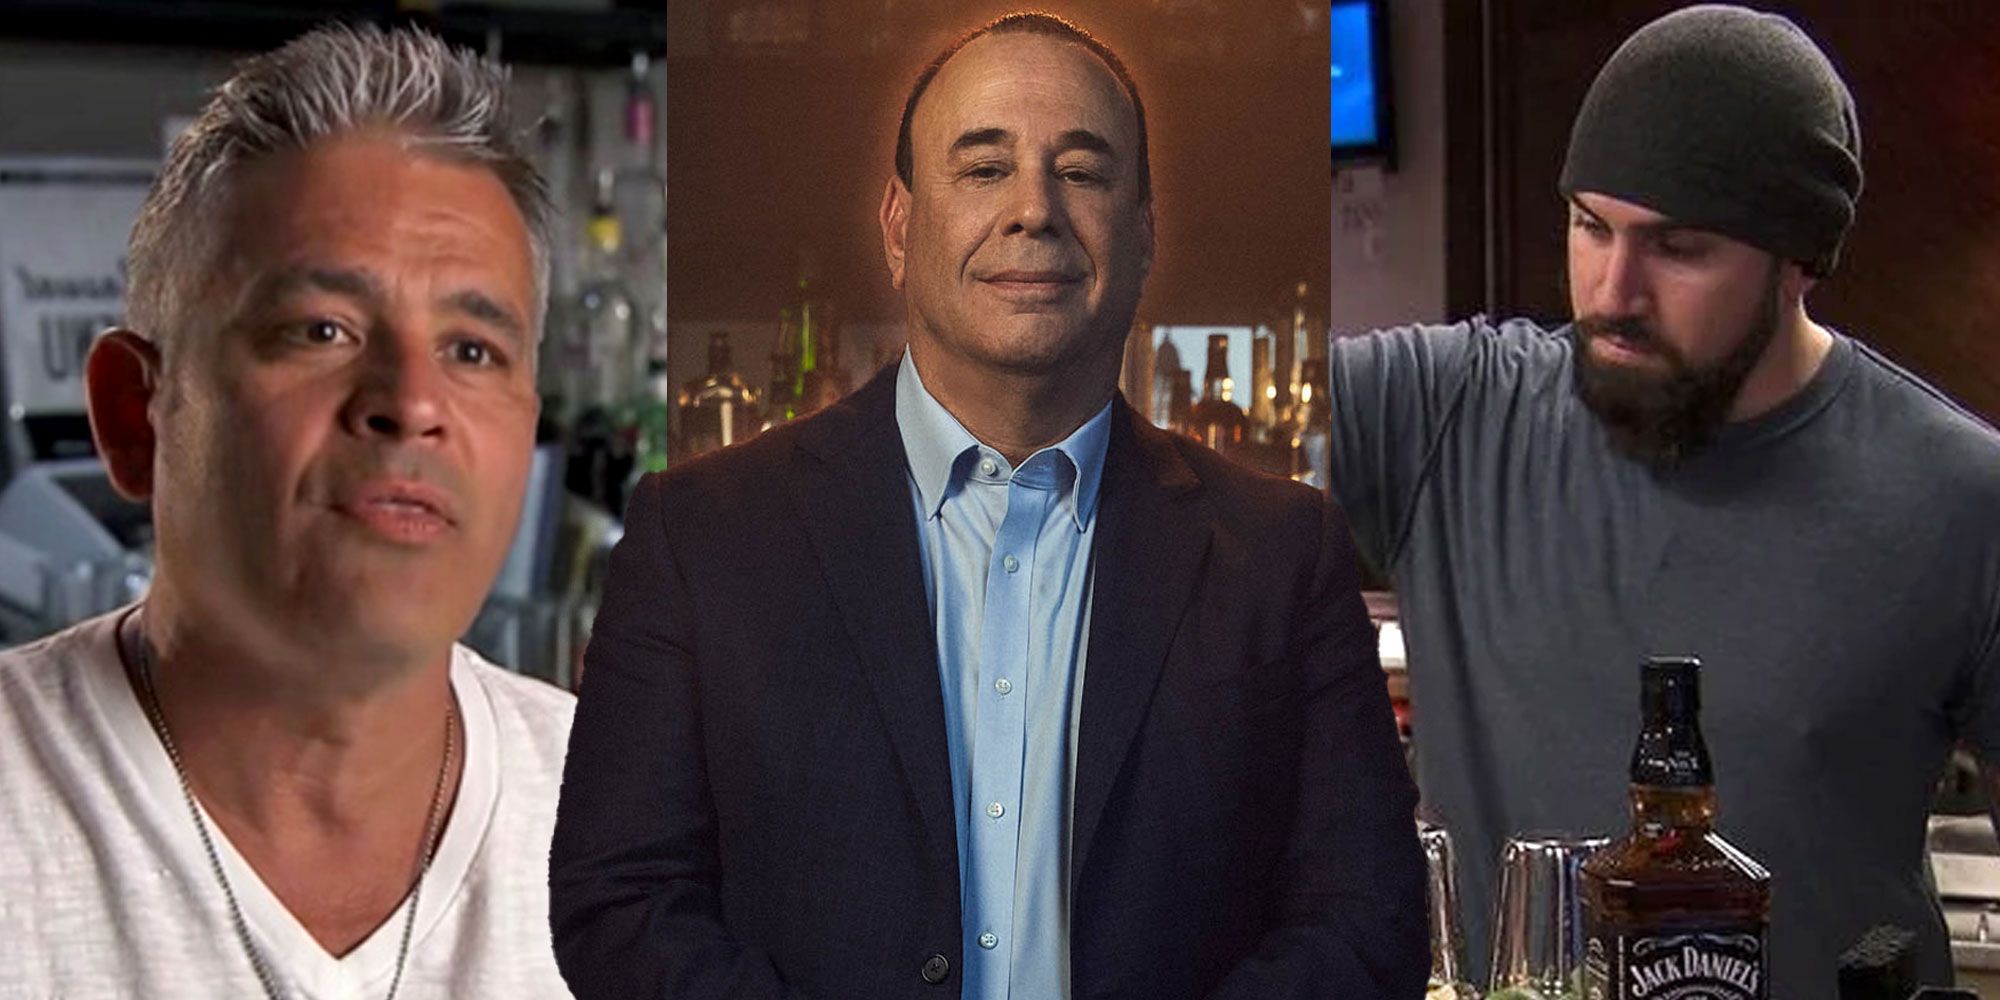 Three split images of John and other bartenders from Bar Rescue